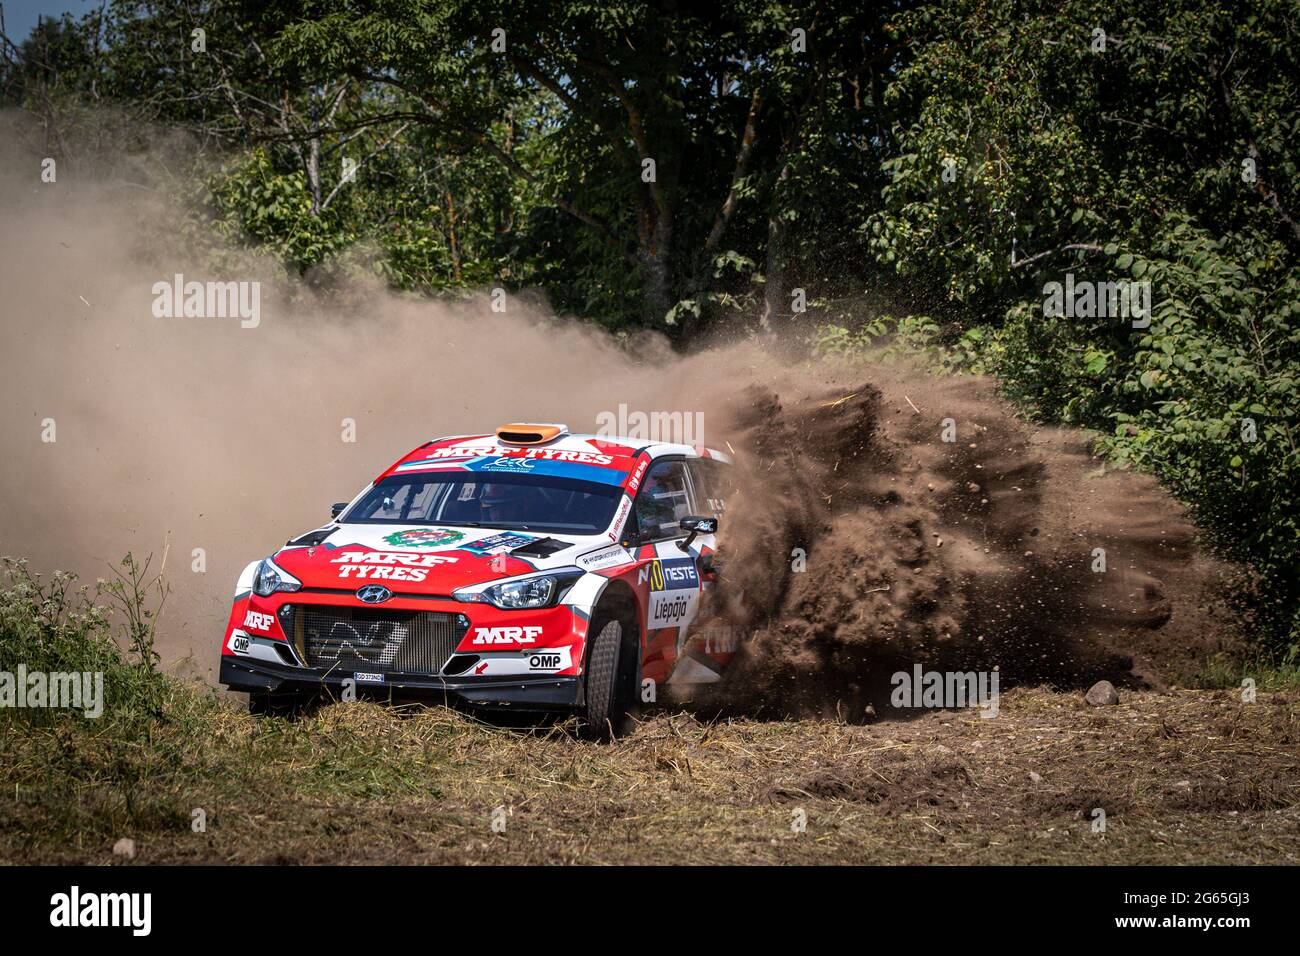 10 BREEN Craig (IRL), NAGLE Paul (IRL), TEAM MRF TYRES, Hyundai i20, action during the 2021 FIA ERC Rally Liepaja, 2nd round of the 2021 FIA European Rally Championship, from July 1 to 3, 2021 in in Liepaja, Latvia - Photo Alexandre Guillaumot / DPPI Stock Photo